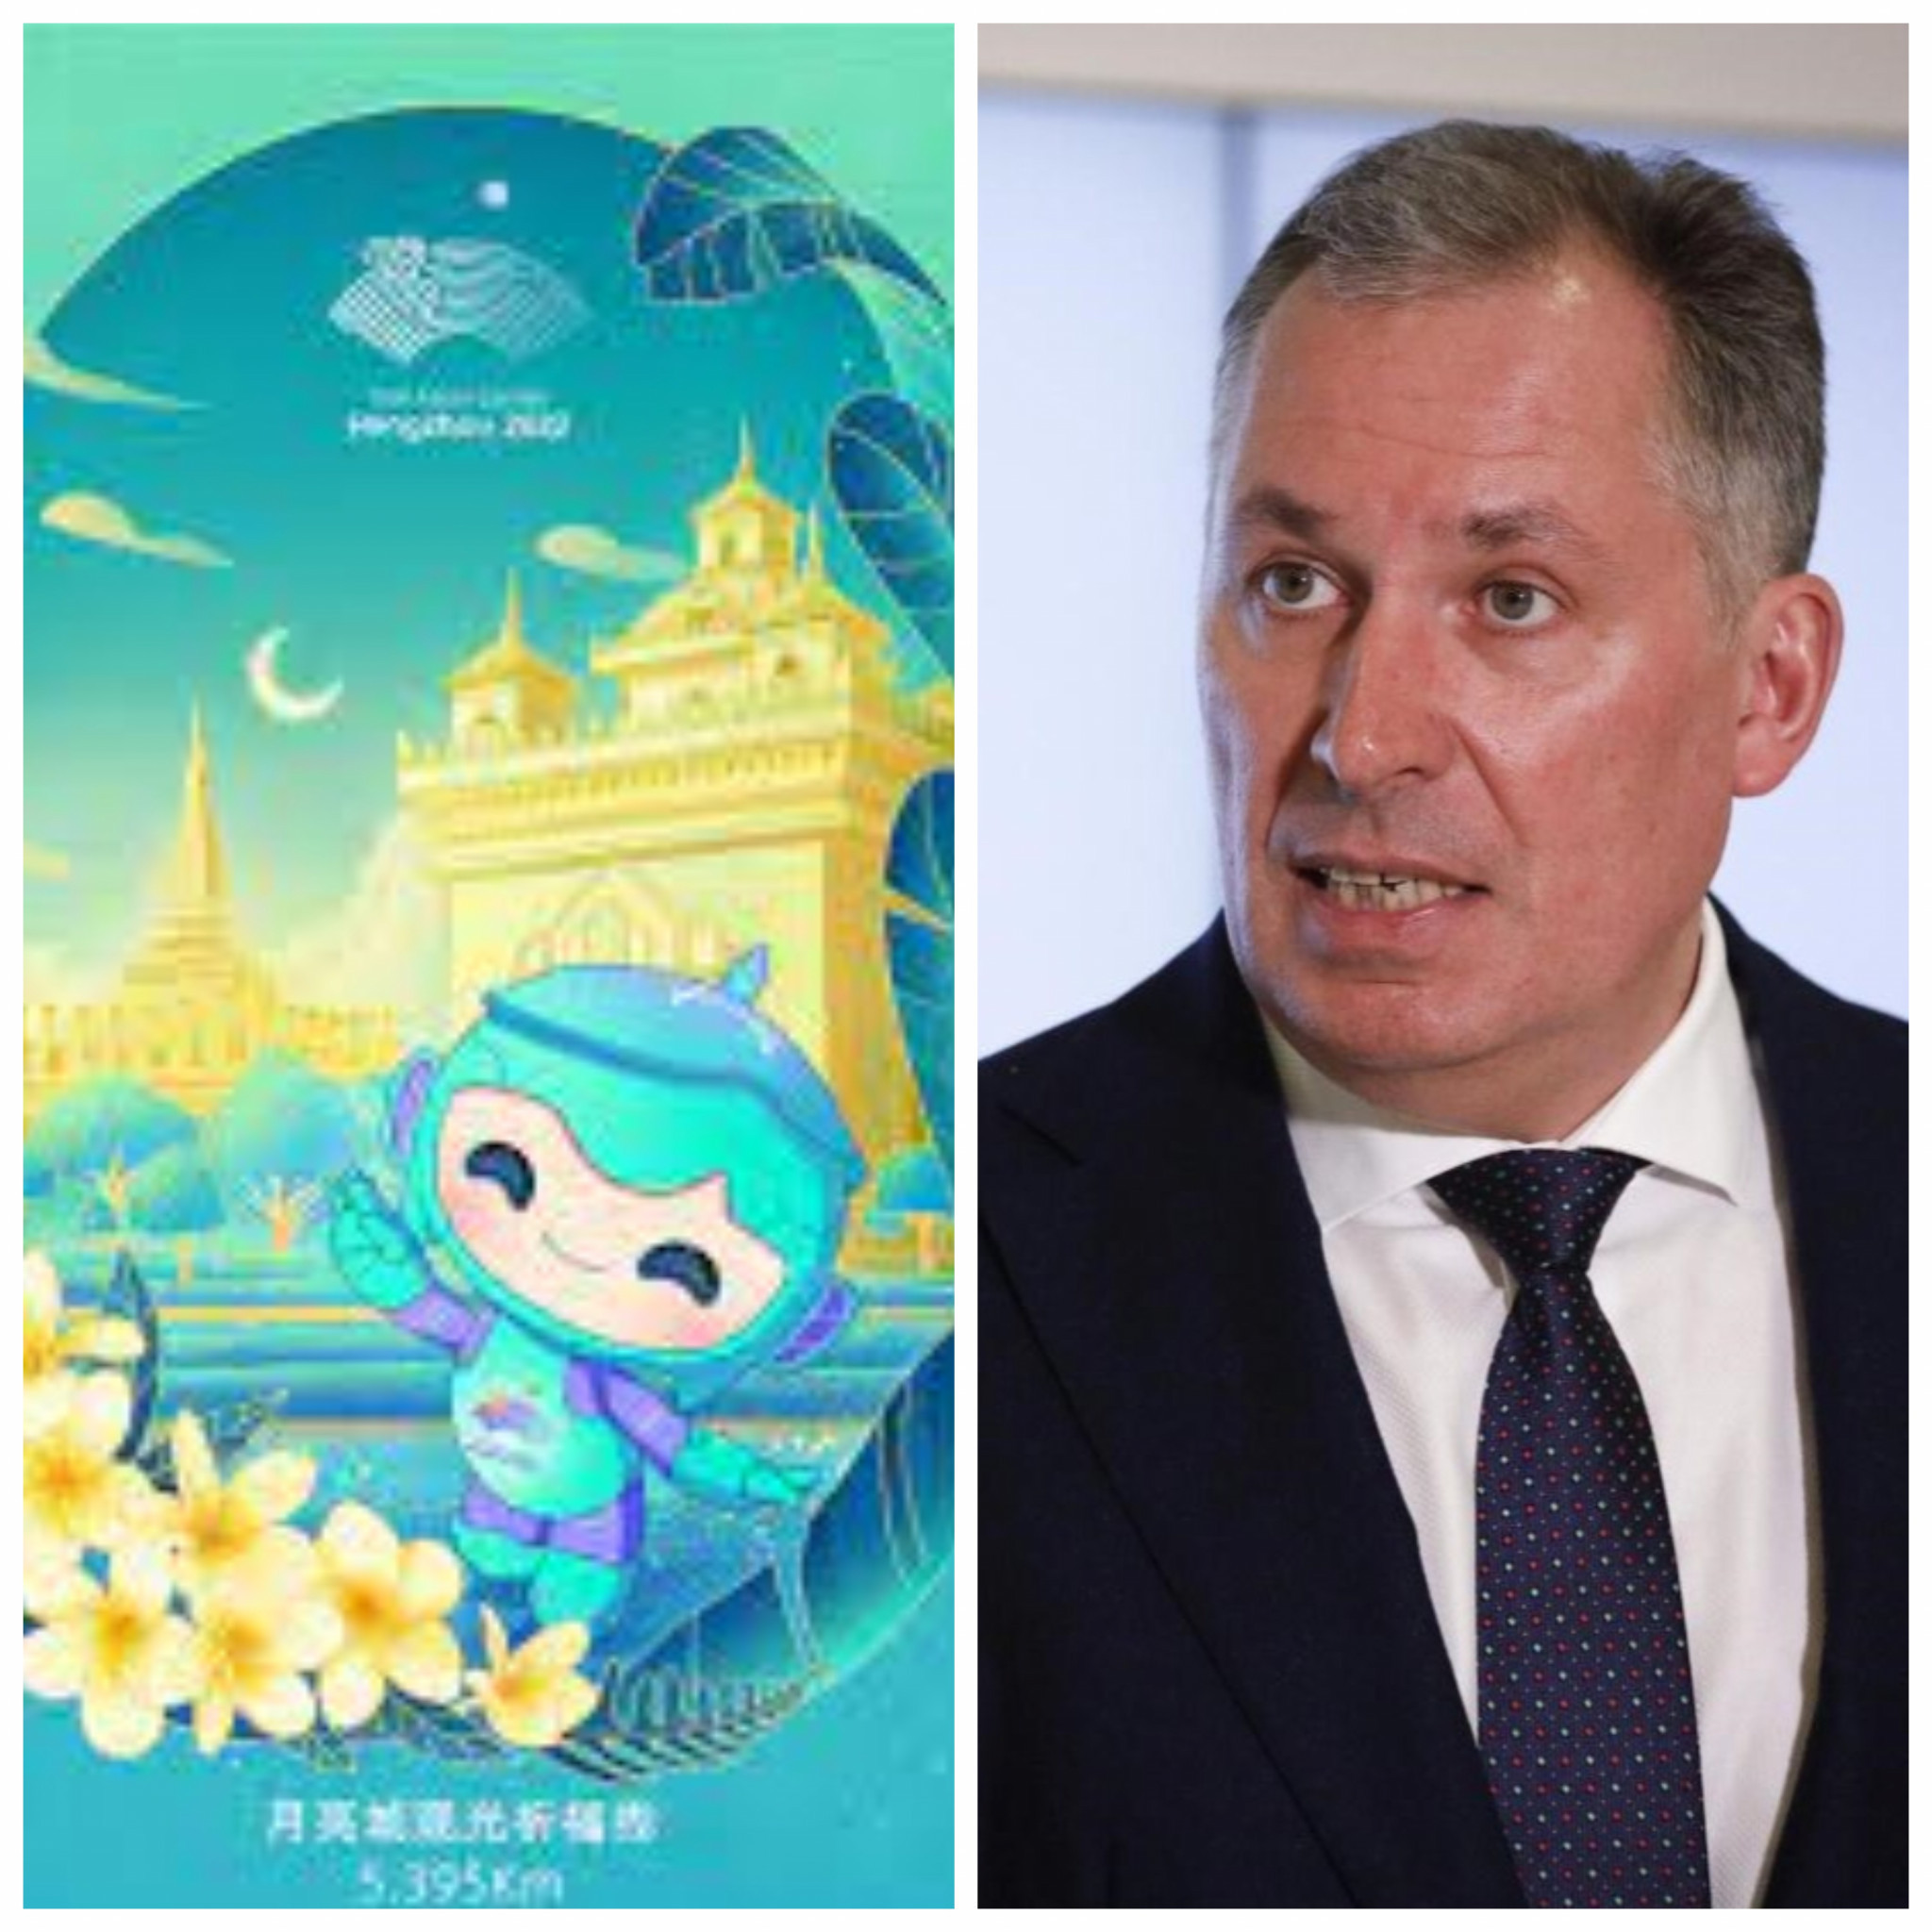 Russian Olympic Committee President Stanislav Pozdnyakov is pessimistic about the chances of athletes from his country being allowed to compete at this year's Asian Games in Hangzhou ©Hangzhou 2022 and ROC 